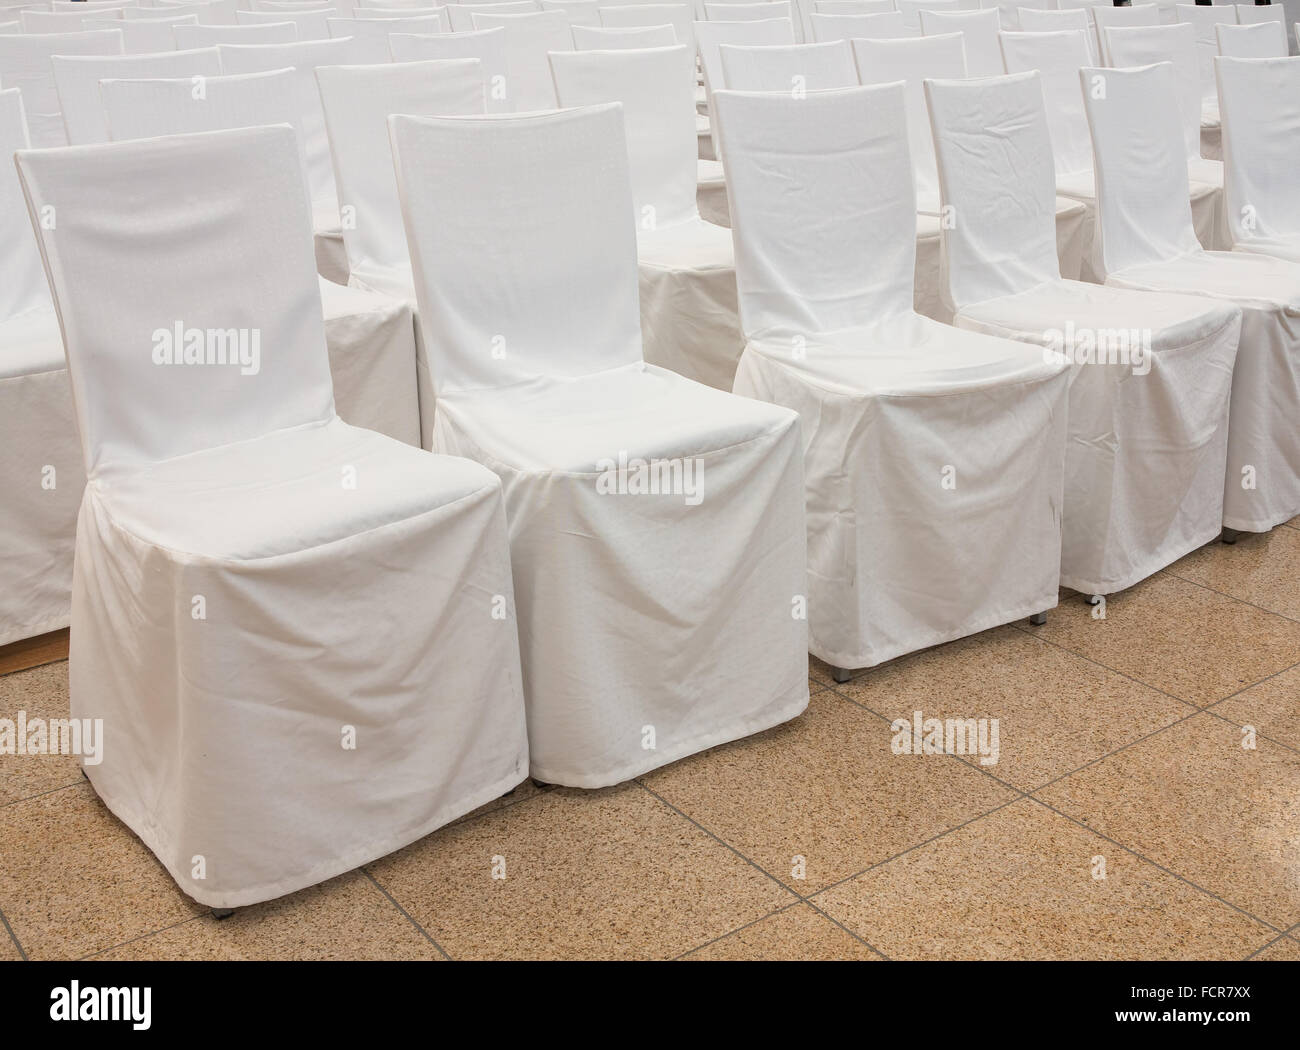 Chairs with white fabric covers in a row Stock Photo